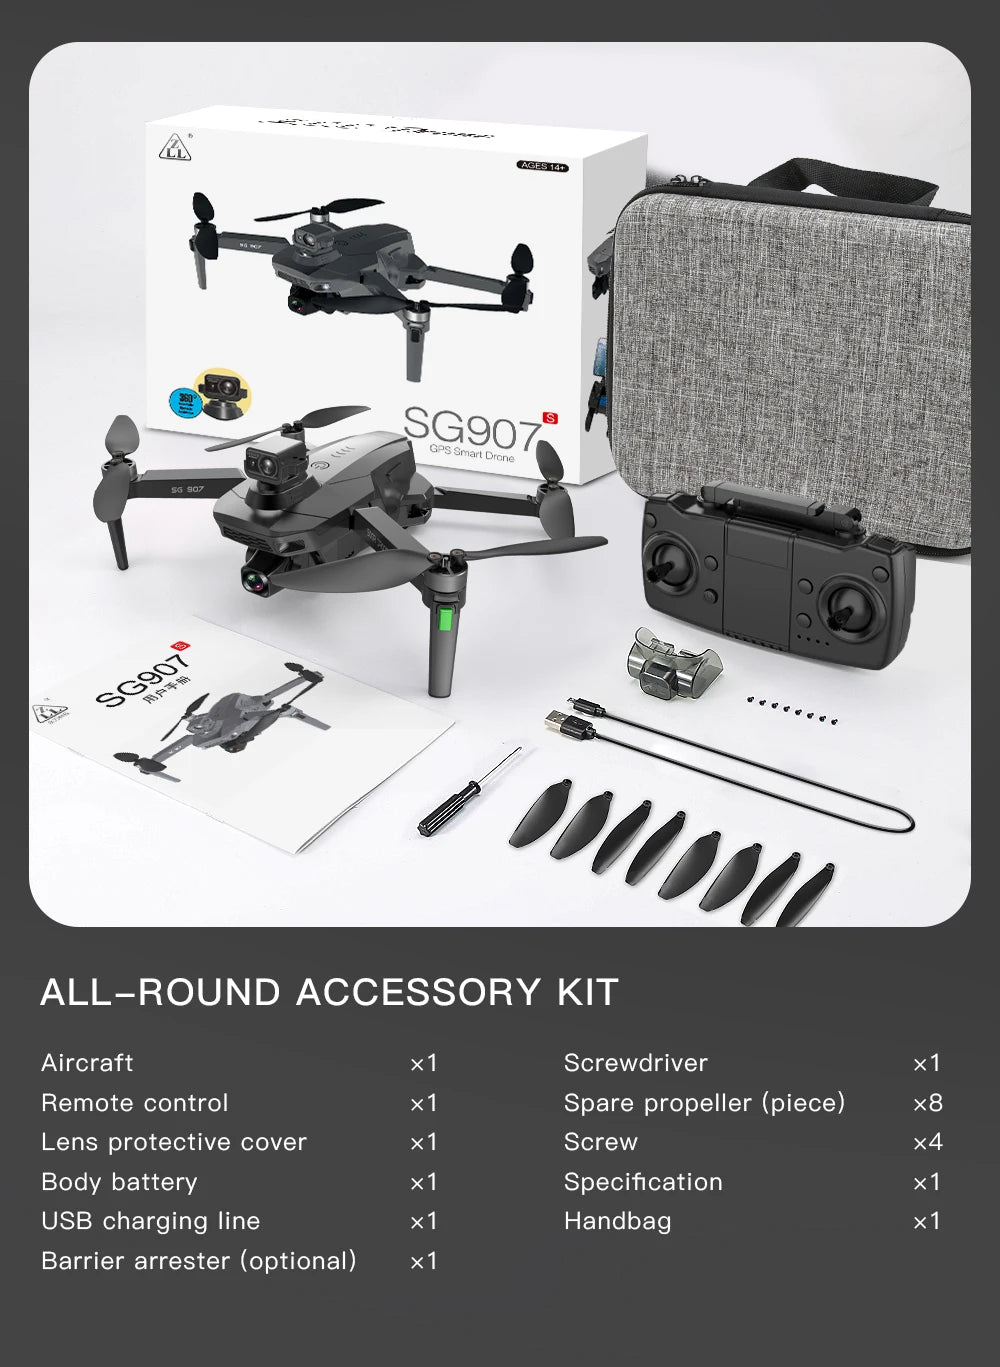 SG907S Drone, GPS ALL-ROUND ACCESSORY KIT Aircraft x1 Screwdrive